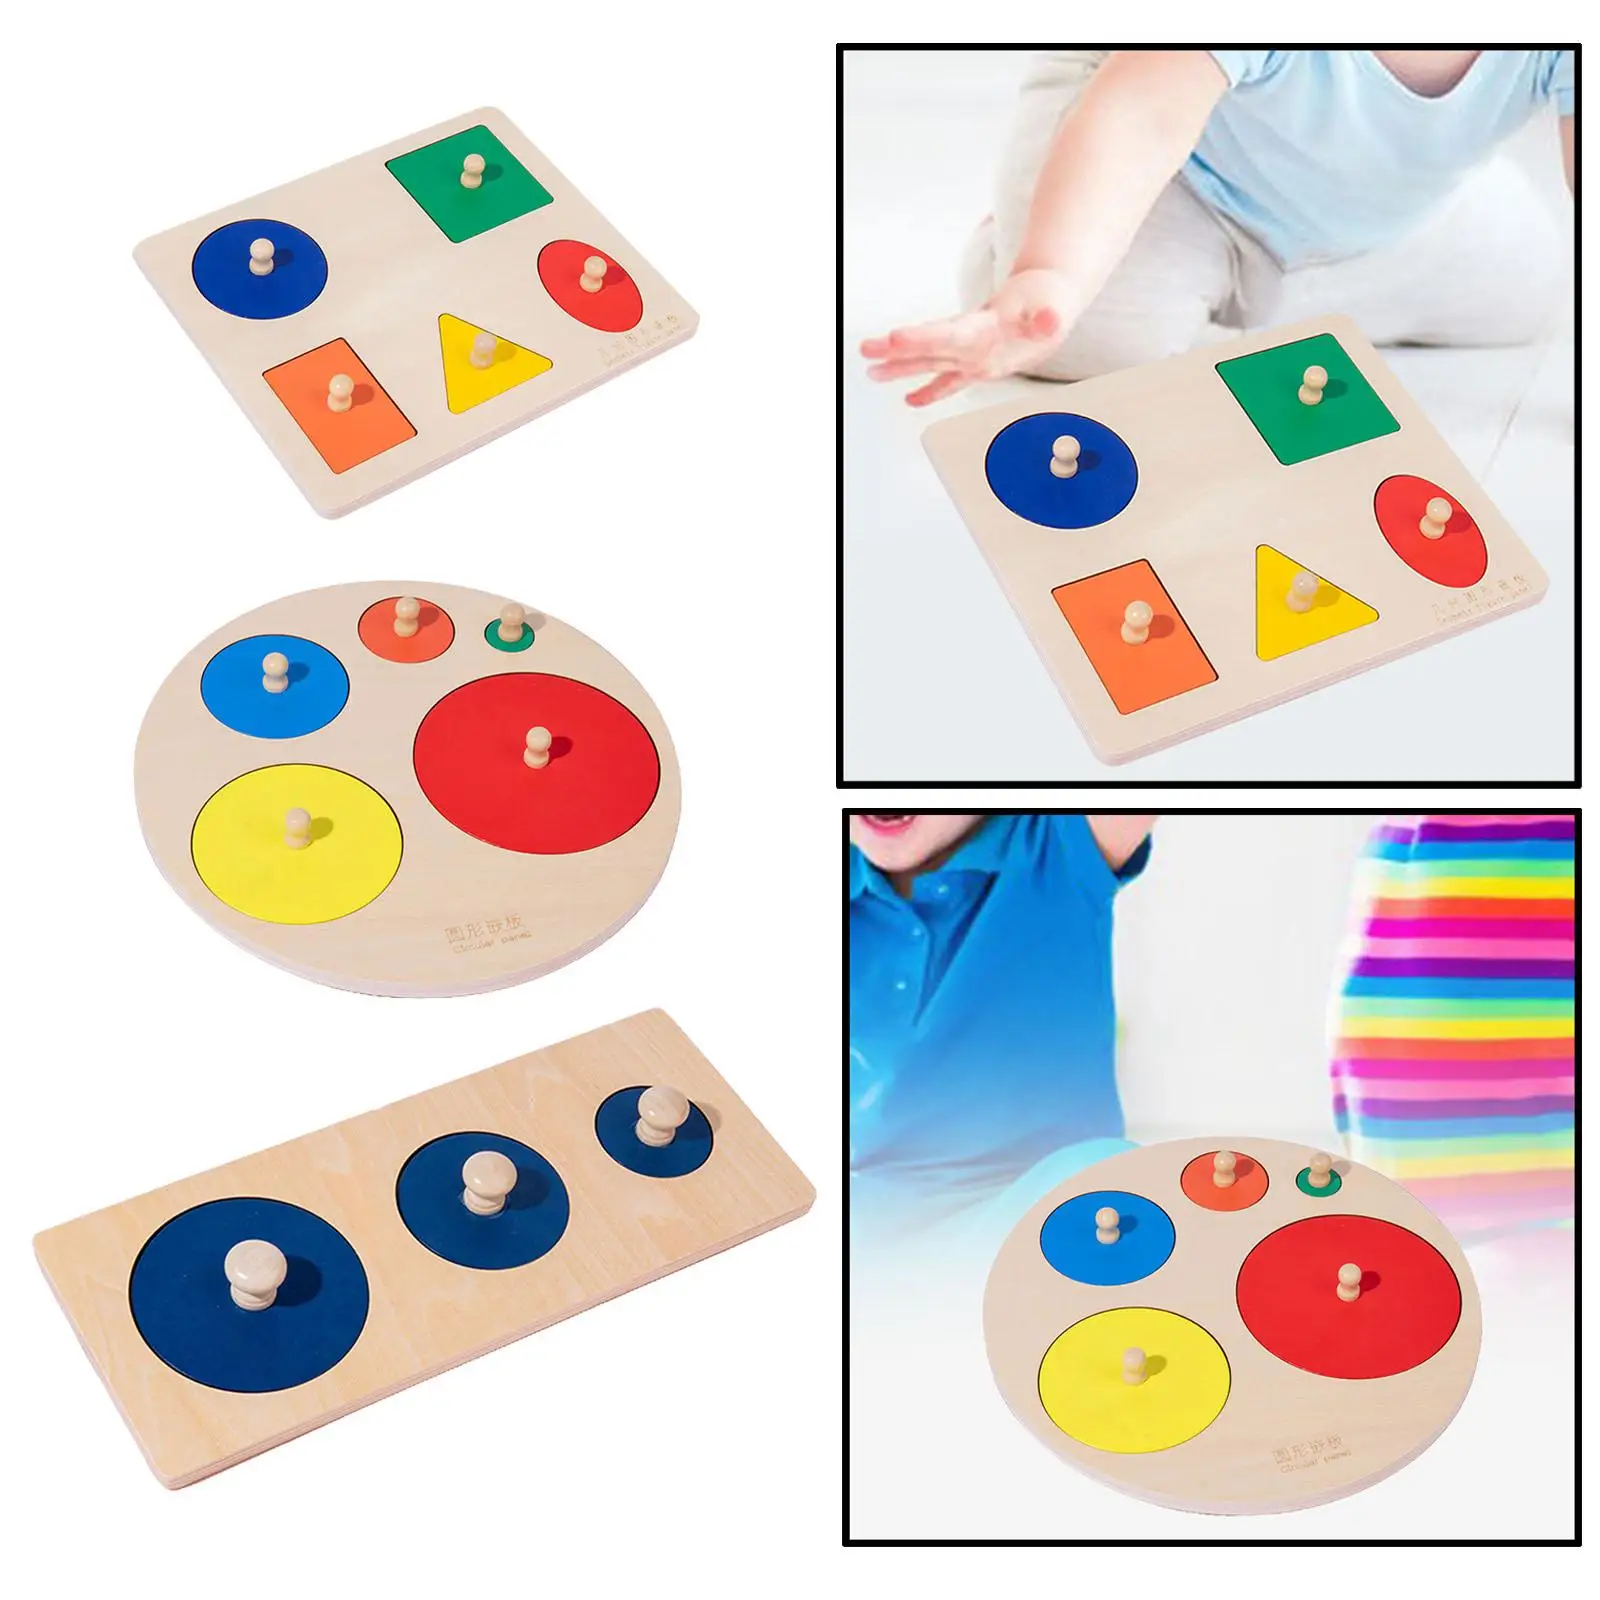 Wood Shape Puzzles Memory Games Sensory Toy for Birthday Playroom Teaching